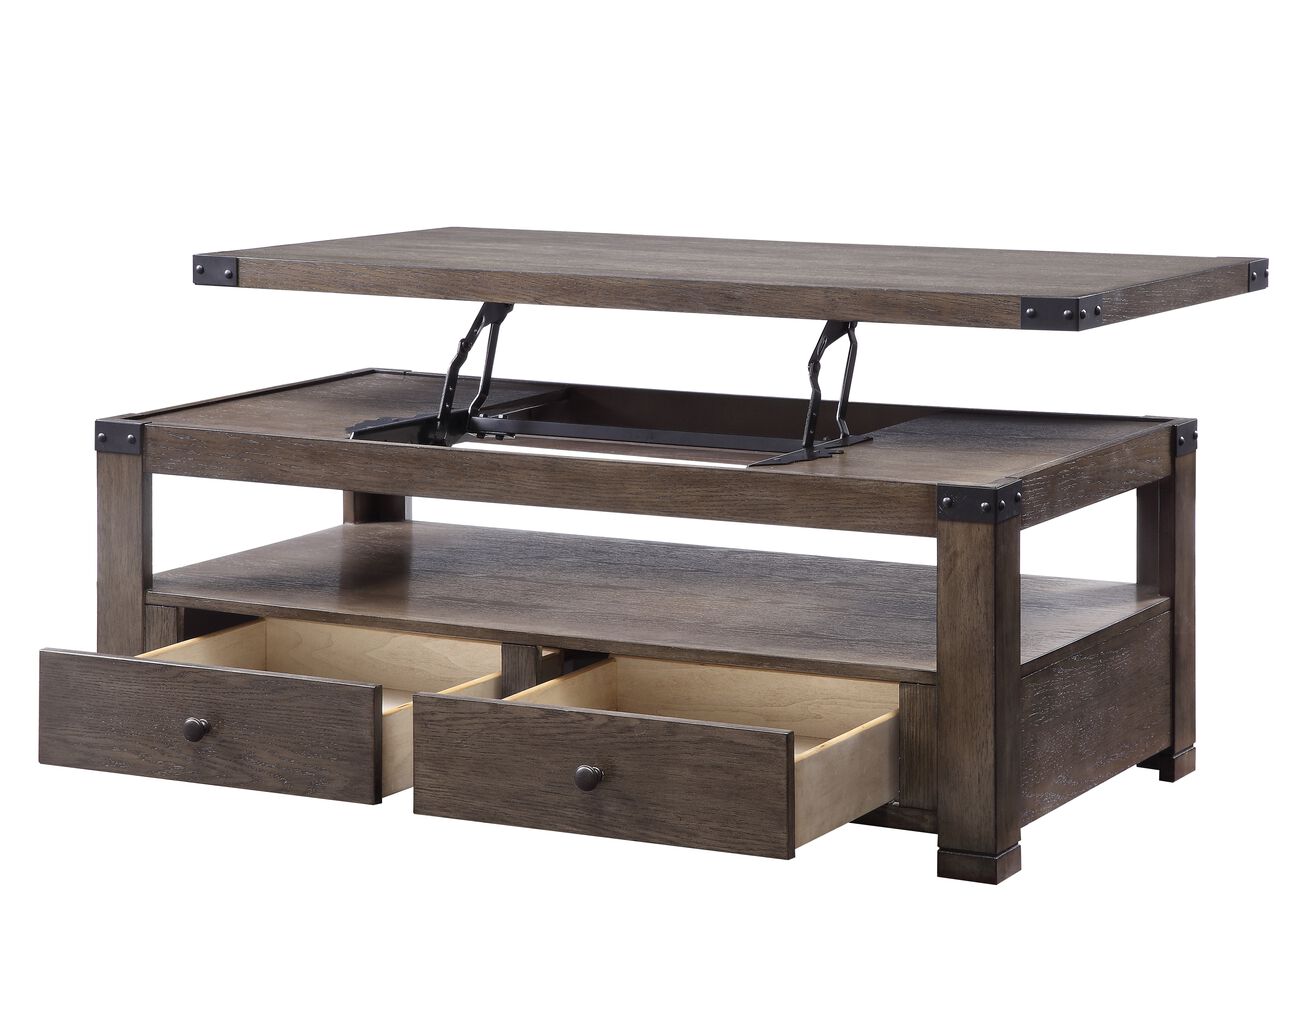 Transitional Style Wooden Coffee Table with Two Drawers, Gray